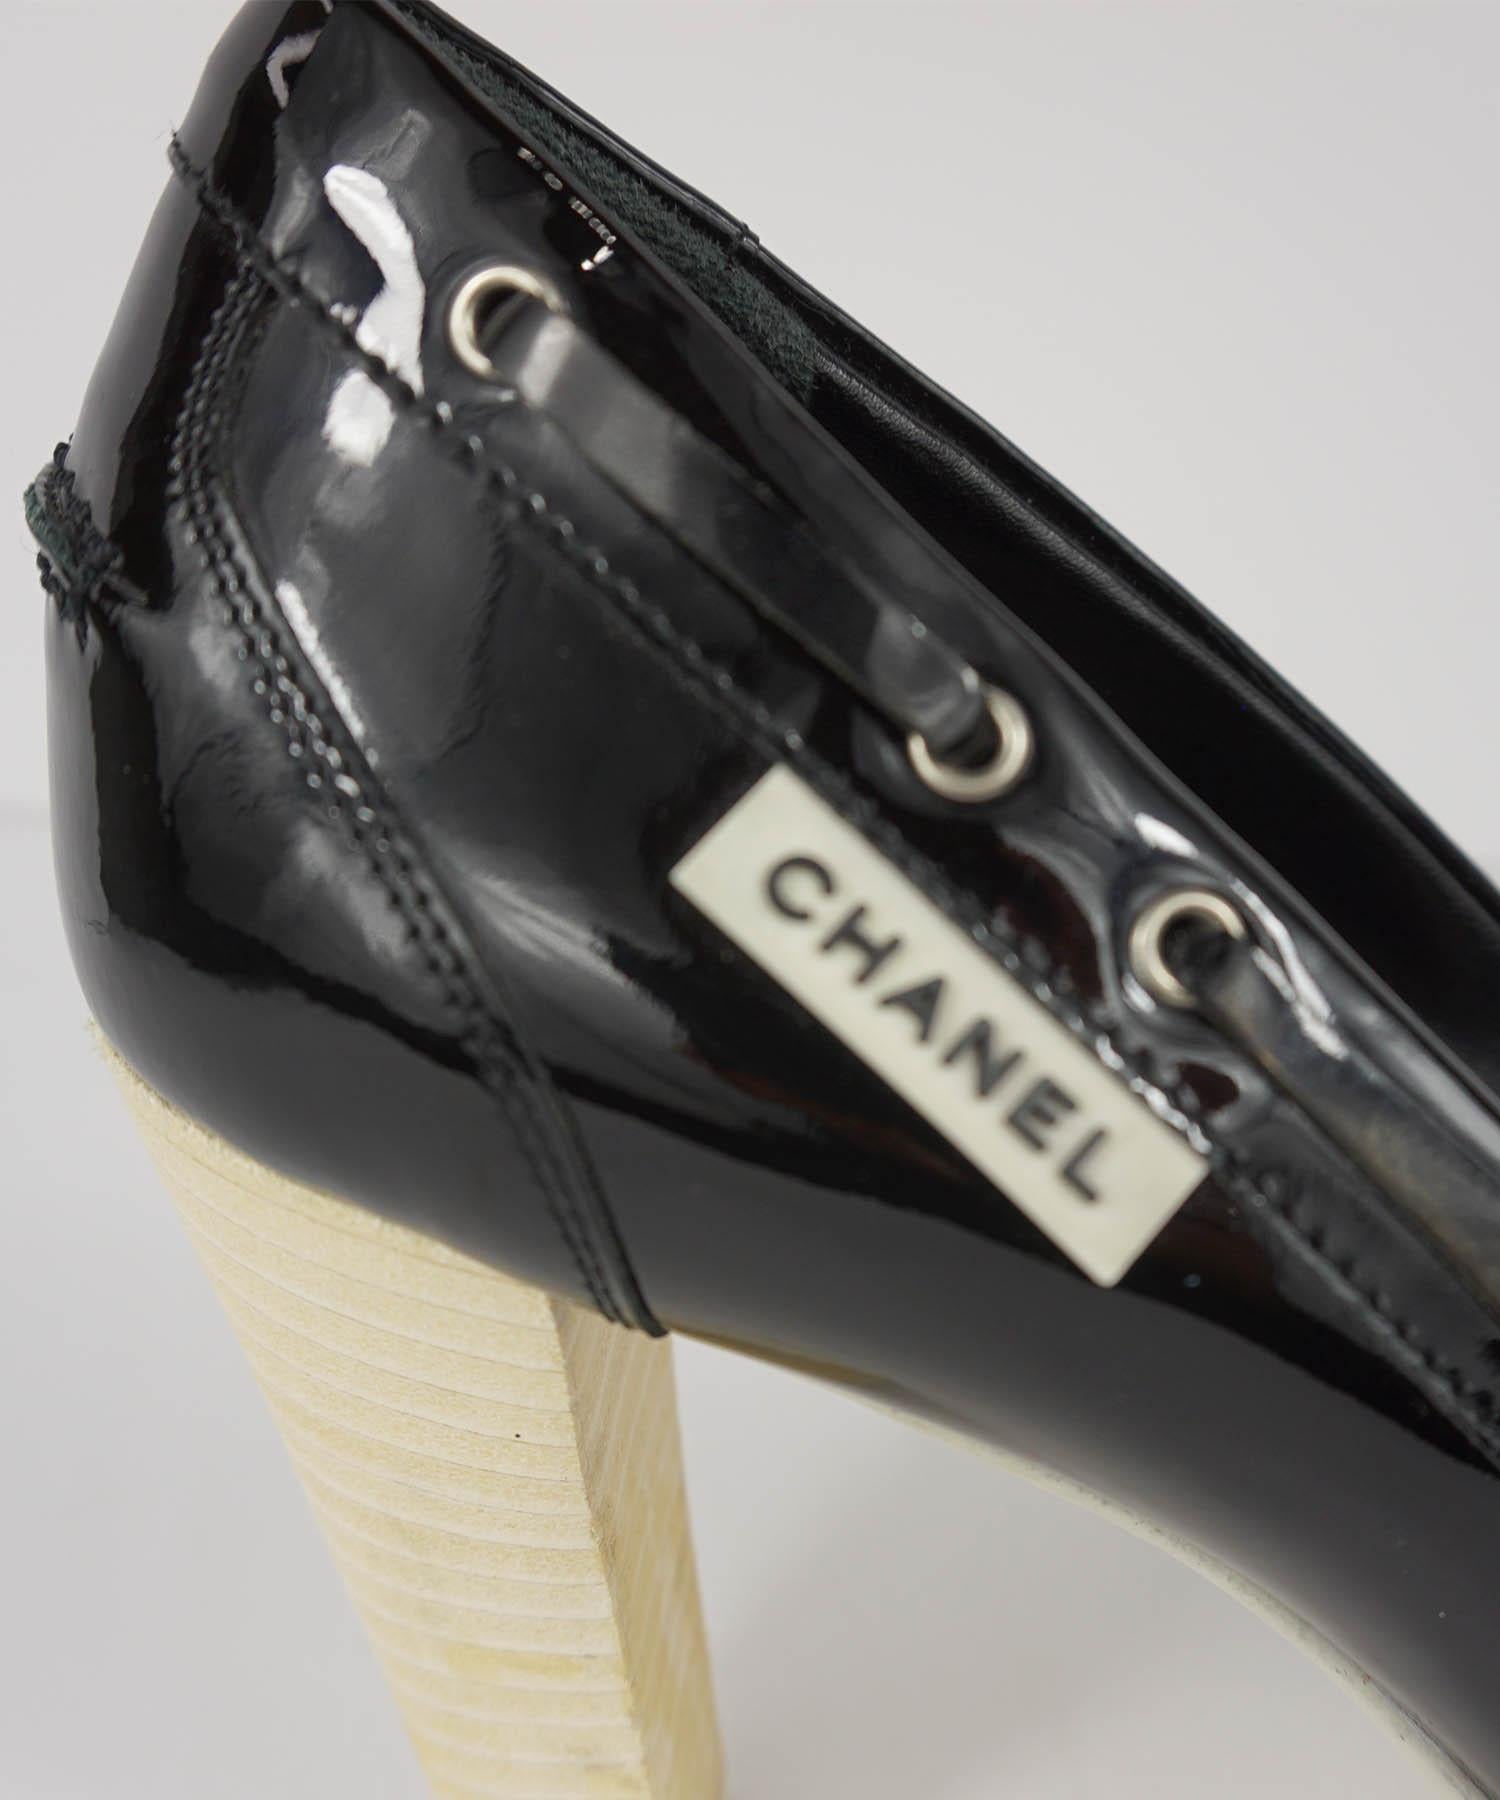 Chanel Black and White Patent Leather Boat Shoe Pumps Size 38